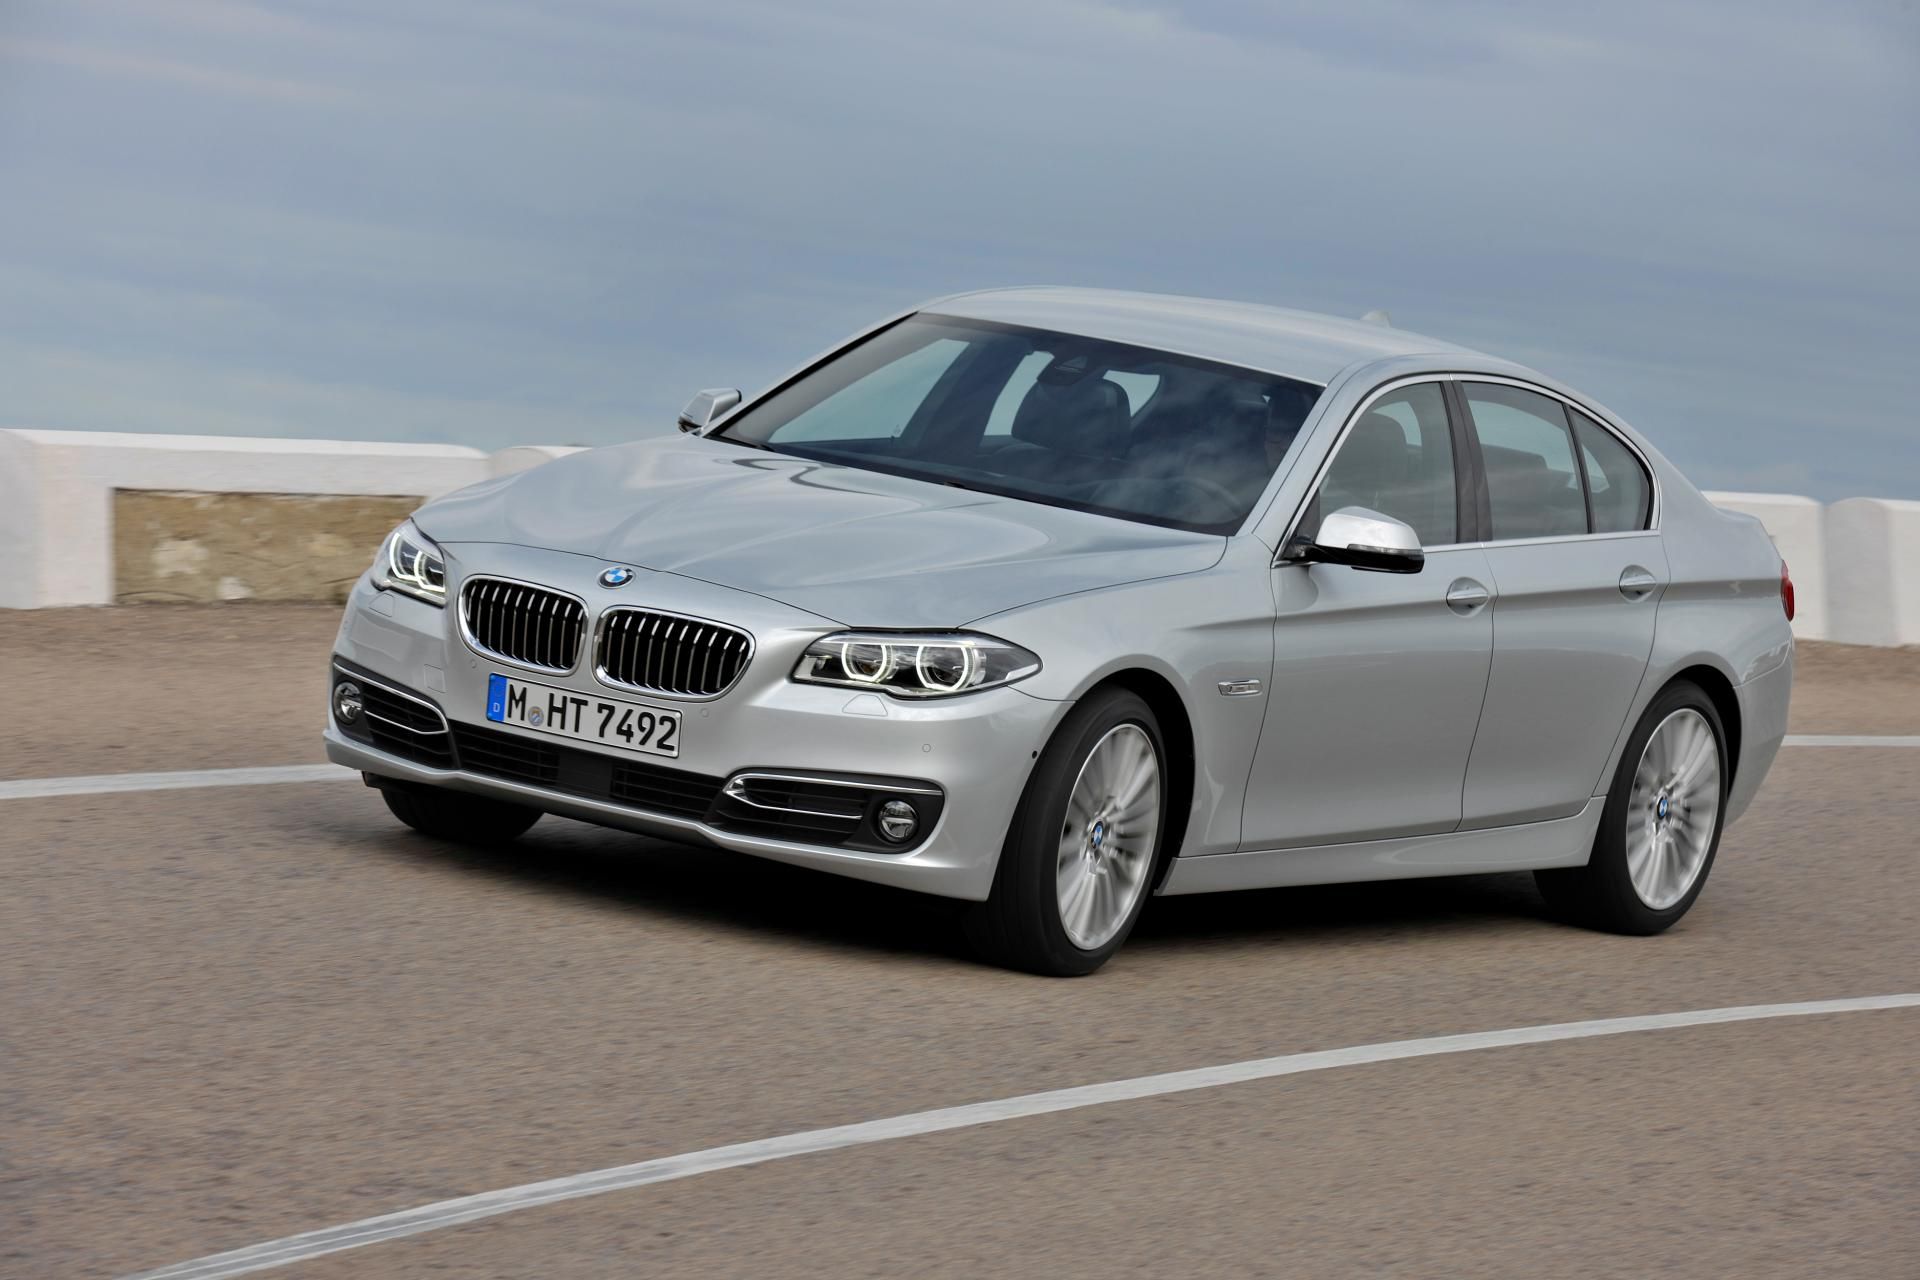 BMW 5 Series News And Information